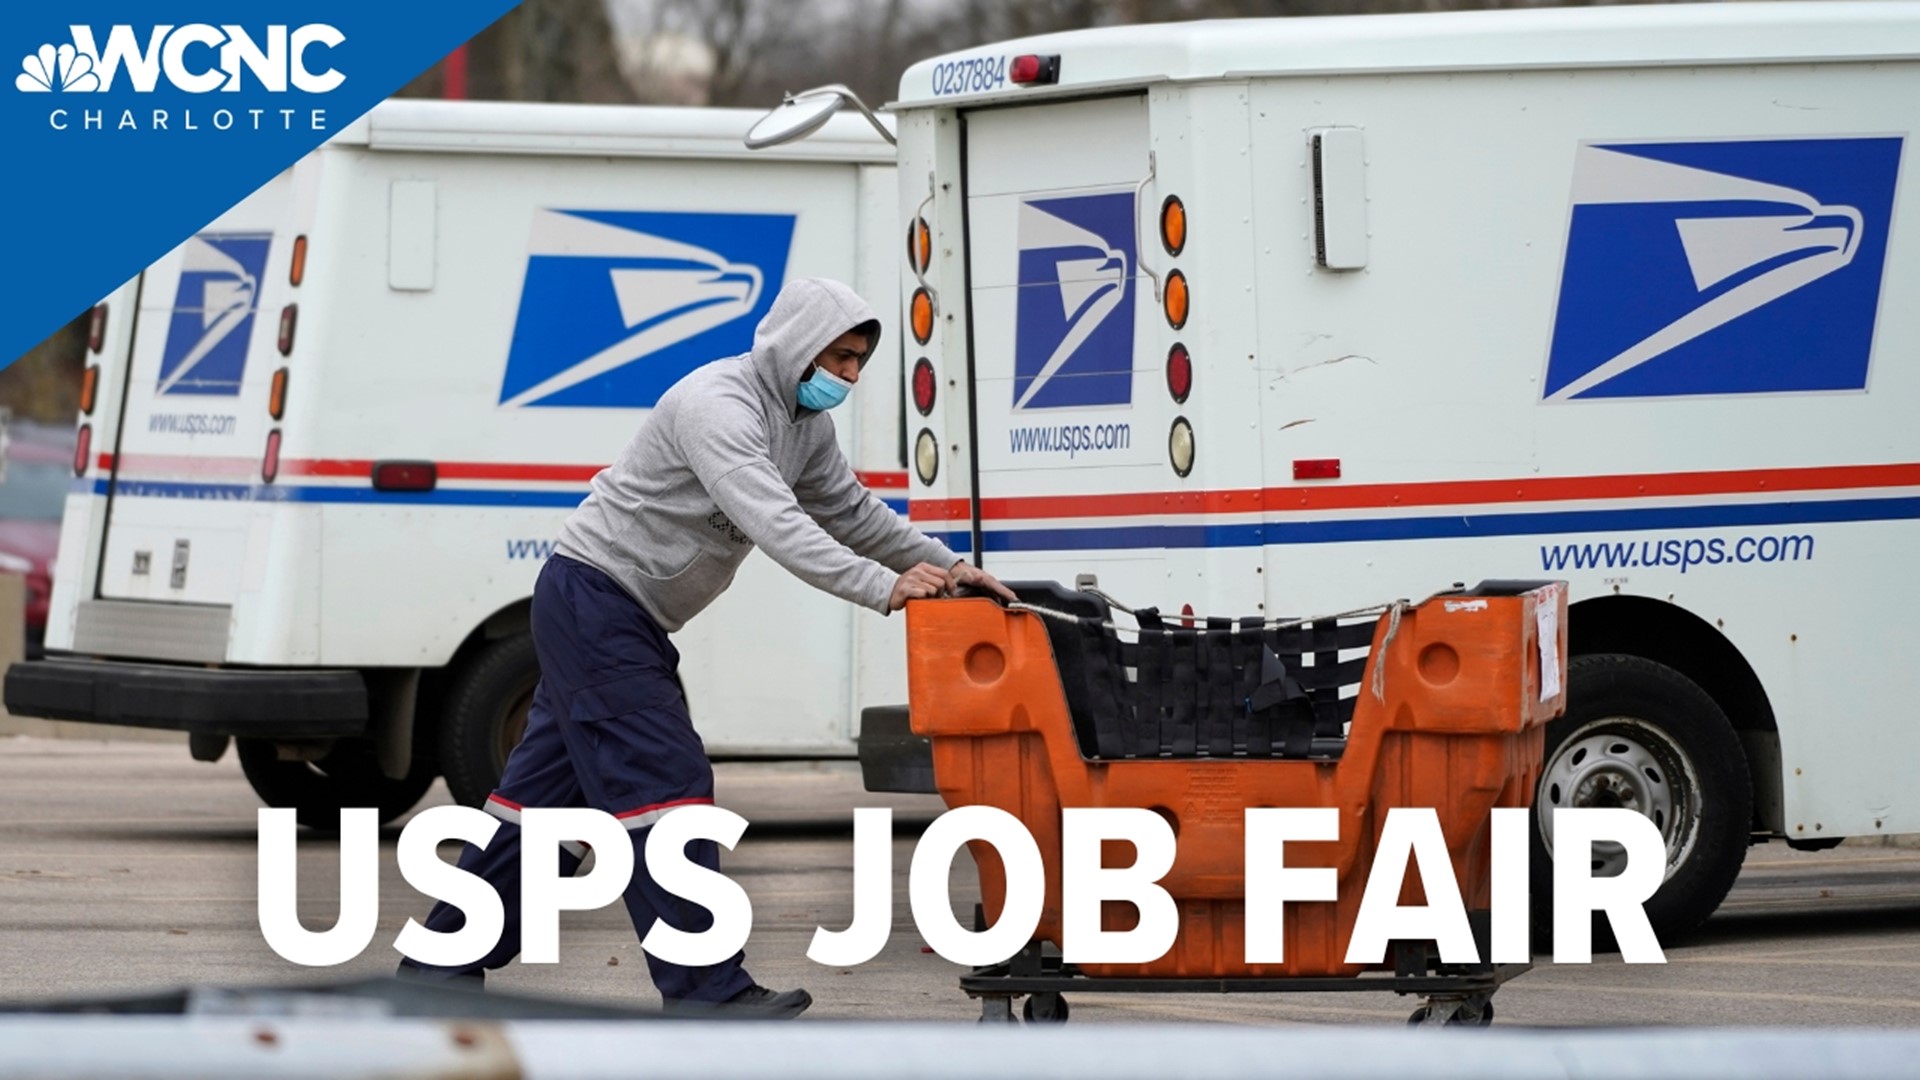 The post office is hosting a job fair on Friday, Oct. 21 at the North Tryon Station post office starting at 11 am.